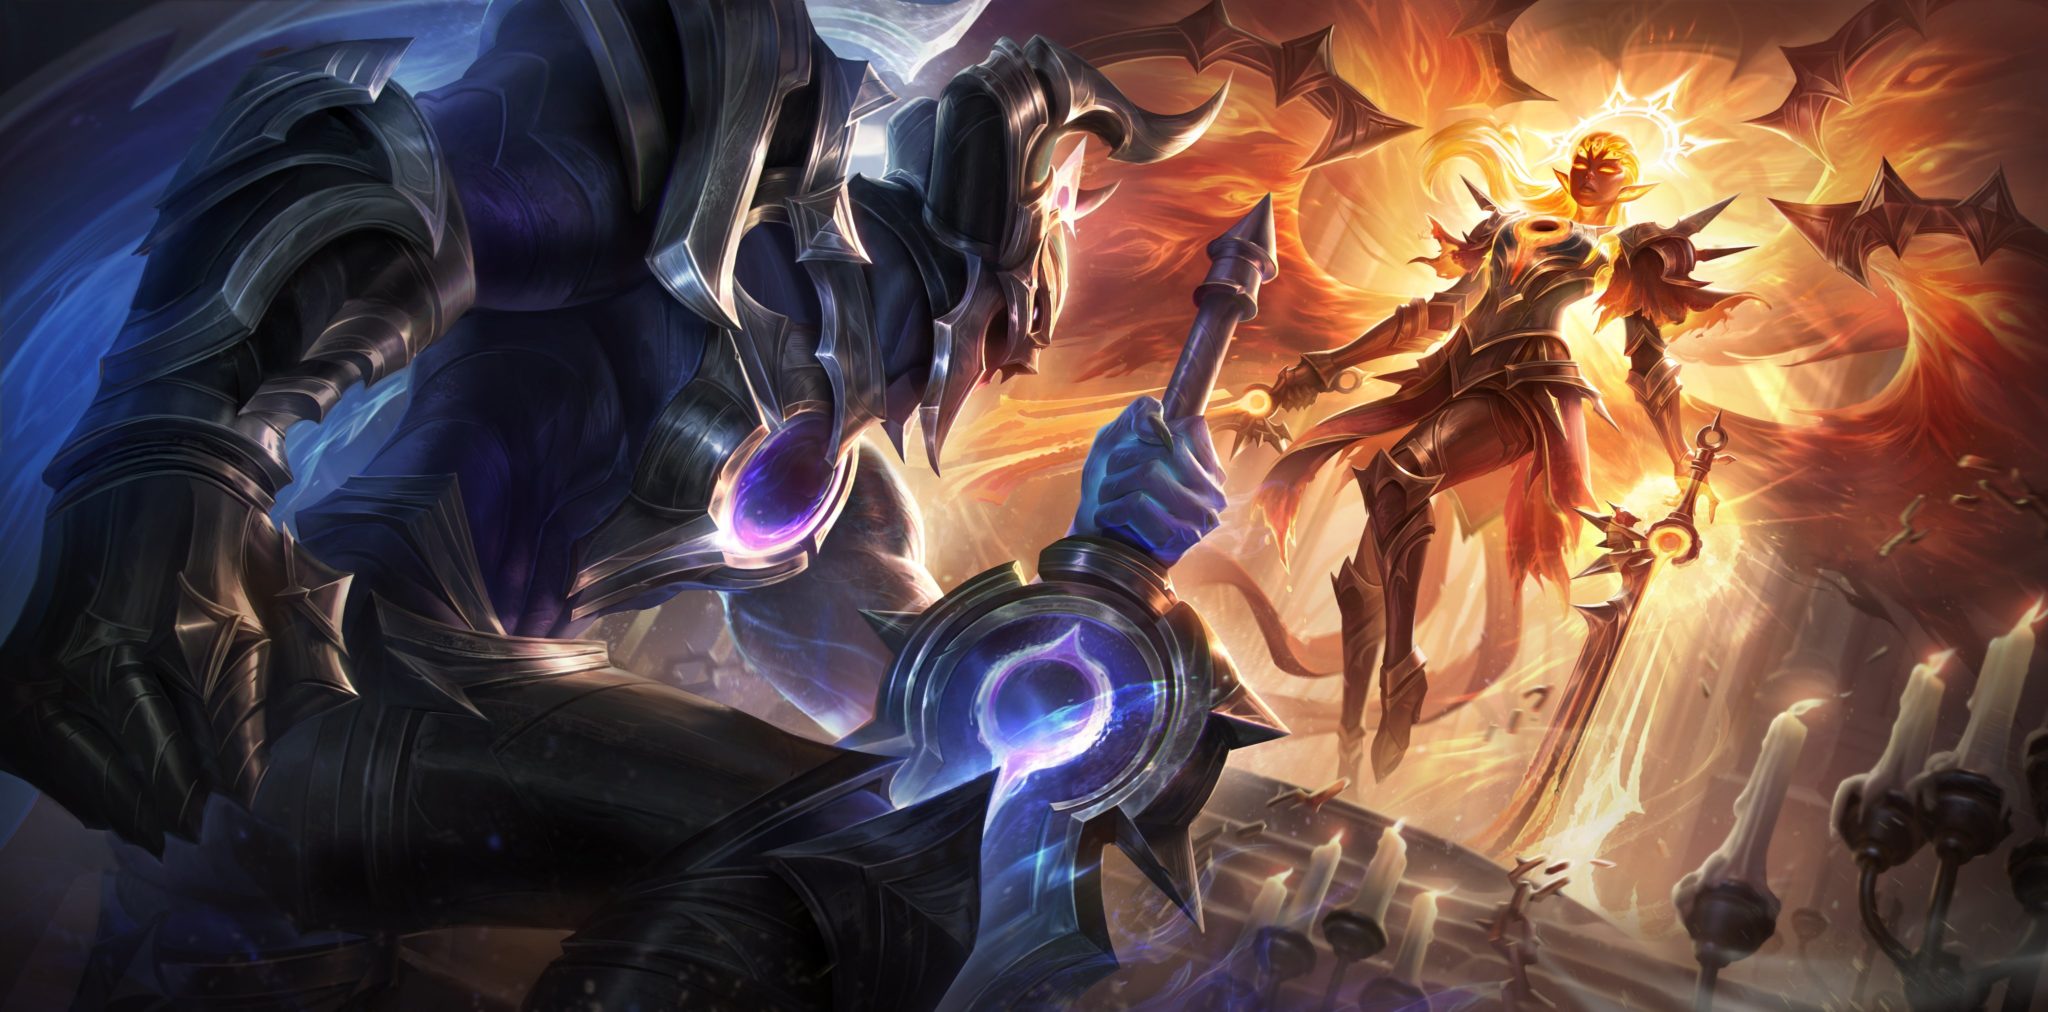 How to complete the ‘O Brave Knight’ mission in League of Legends